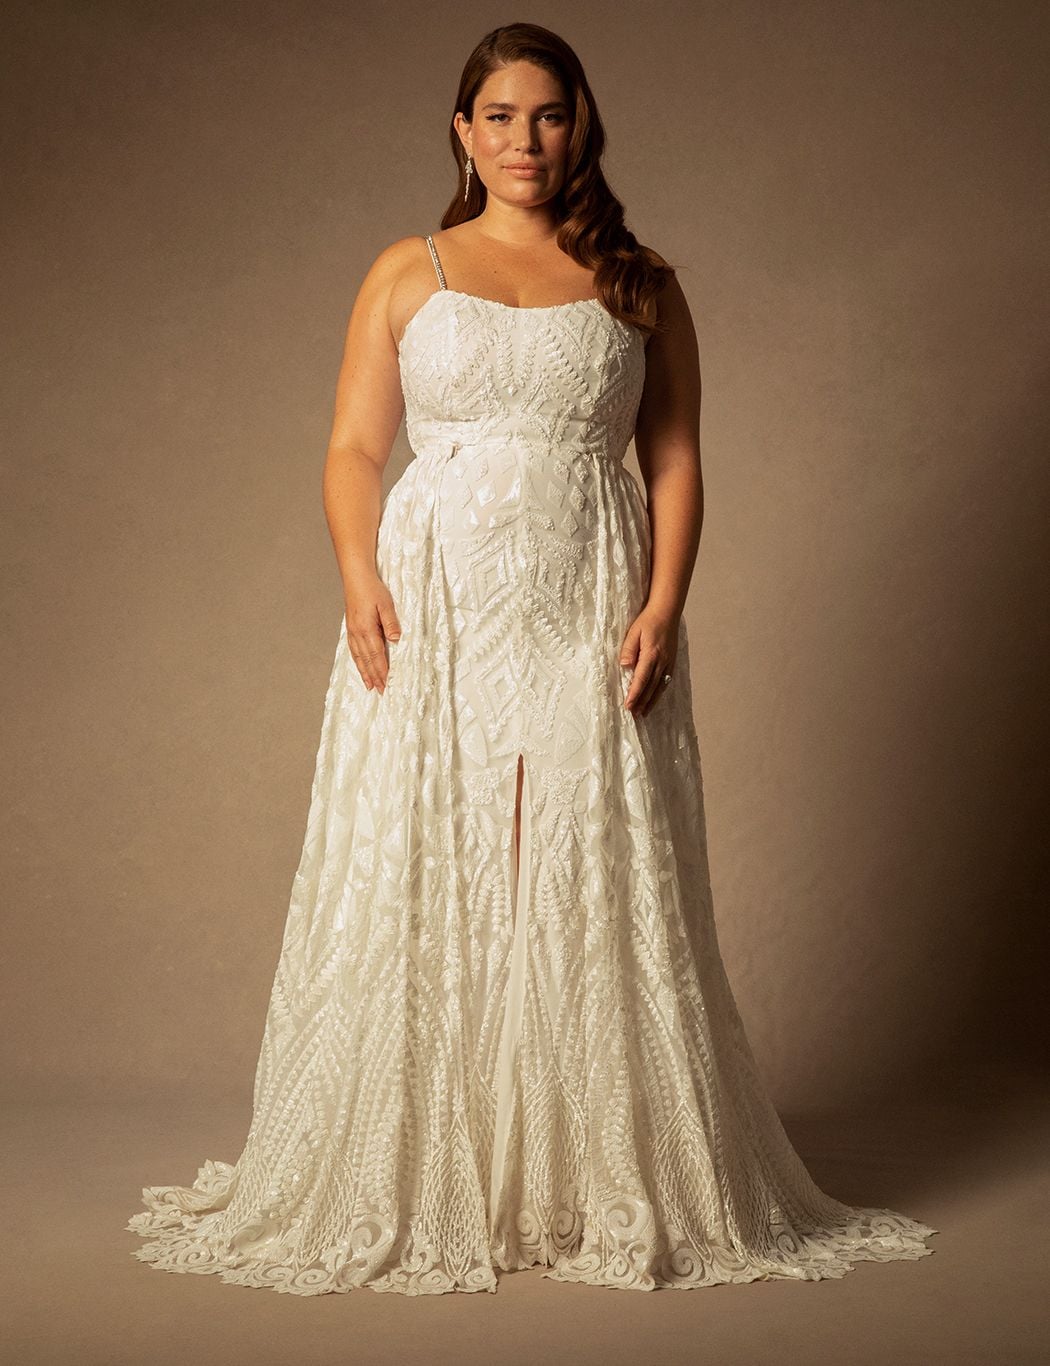 How To Pick The Best Plus Size Wedding Dress – 4 Tips From An